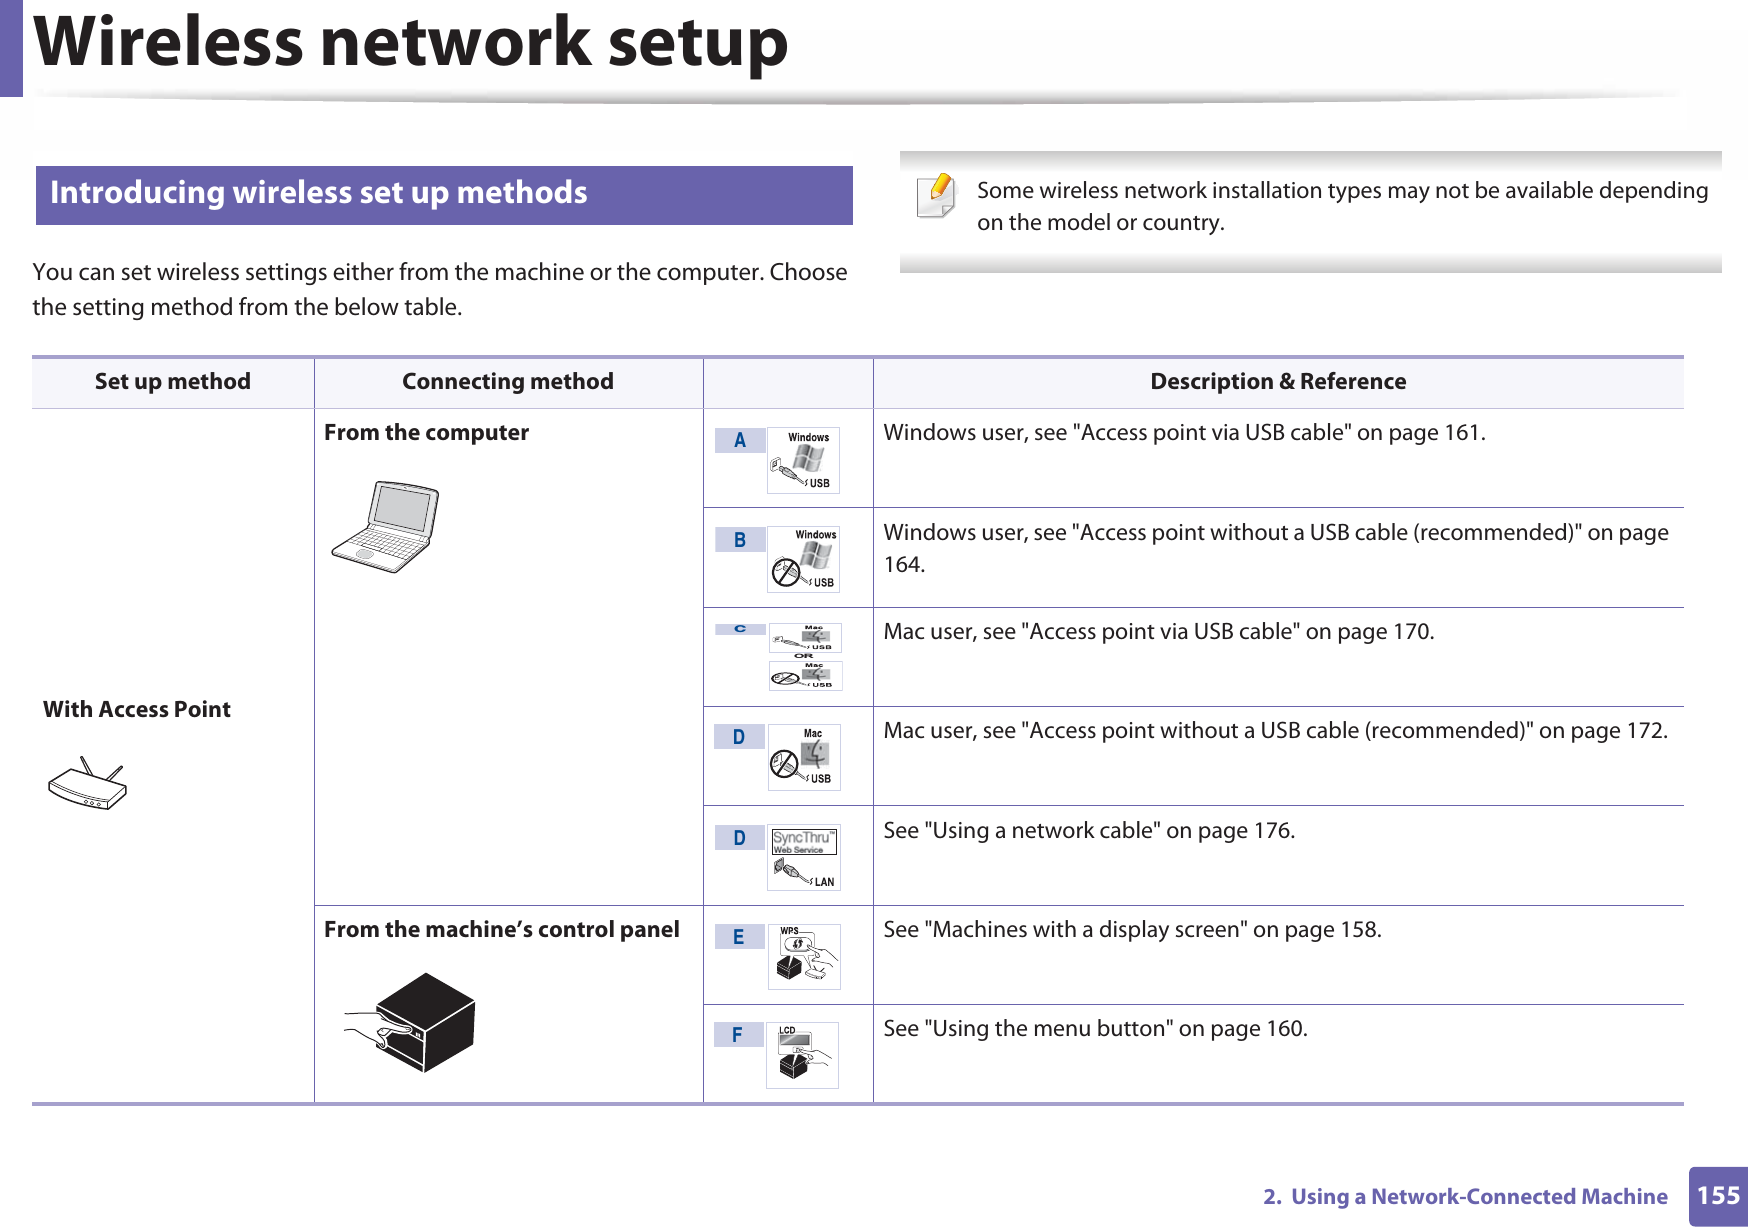 Wireless network setup1552.  Using a Network-Connected Machine13 Introducing wireless set up methodsYou can set wireless settings either from the machine or the computer. Choose the setting method from the below table. Some wireless network installation types may not be available depending on the model or country.  Set up method Connecting method Description &amp; ReferenceWith Access PointFrom the computer Windows user, see &quot;Access point via USB cable&quot; on page 161.Windows user, see &quot;Access point without a USB cable (recommended)&quot; on page 164.Mac user, see &quot;Access point via USB cable&quot; on page 170.Mac user, see &quot;Access point without a USB cable (recommended)&quot; on page 172.See &quot;Using a network cable&quot; on page 176.From the machine’s control panel See &quot;Machines with a display screen&quot; on page 158.See &quot;Using the menu button&quot; on page 160.ABCORDDEF